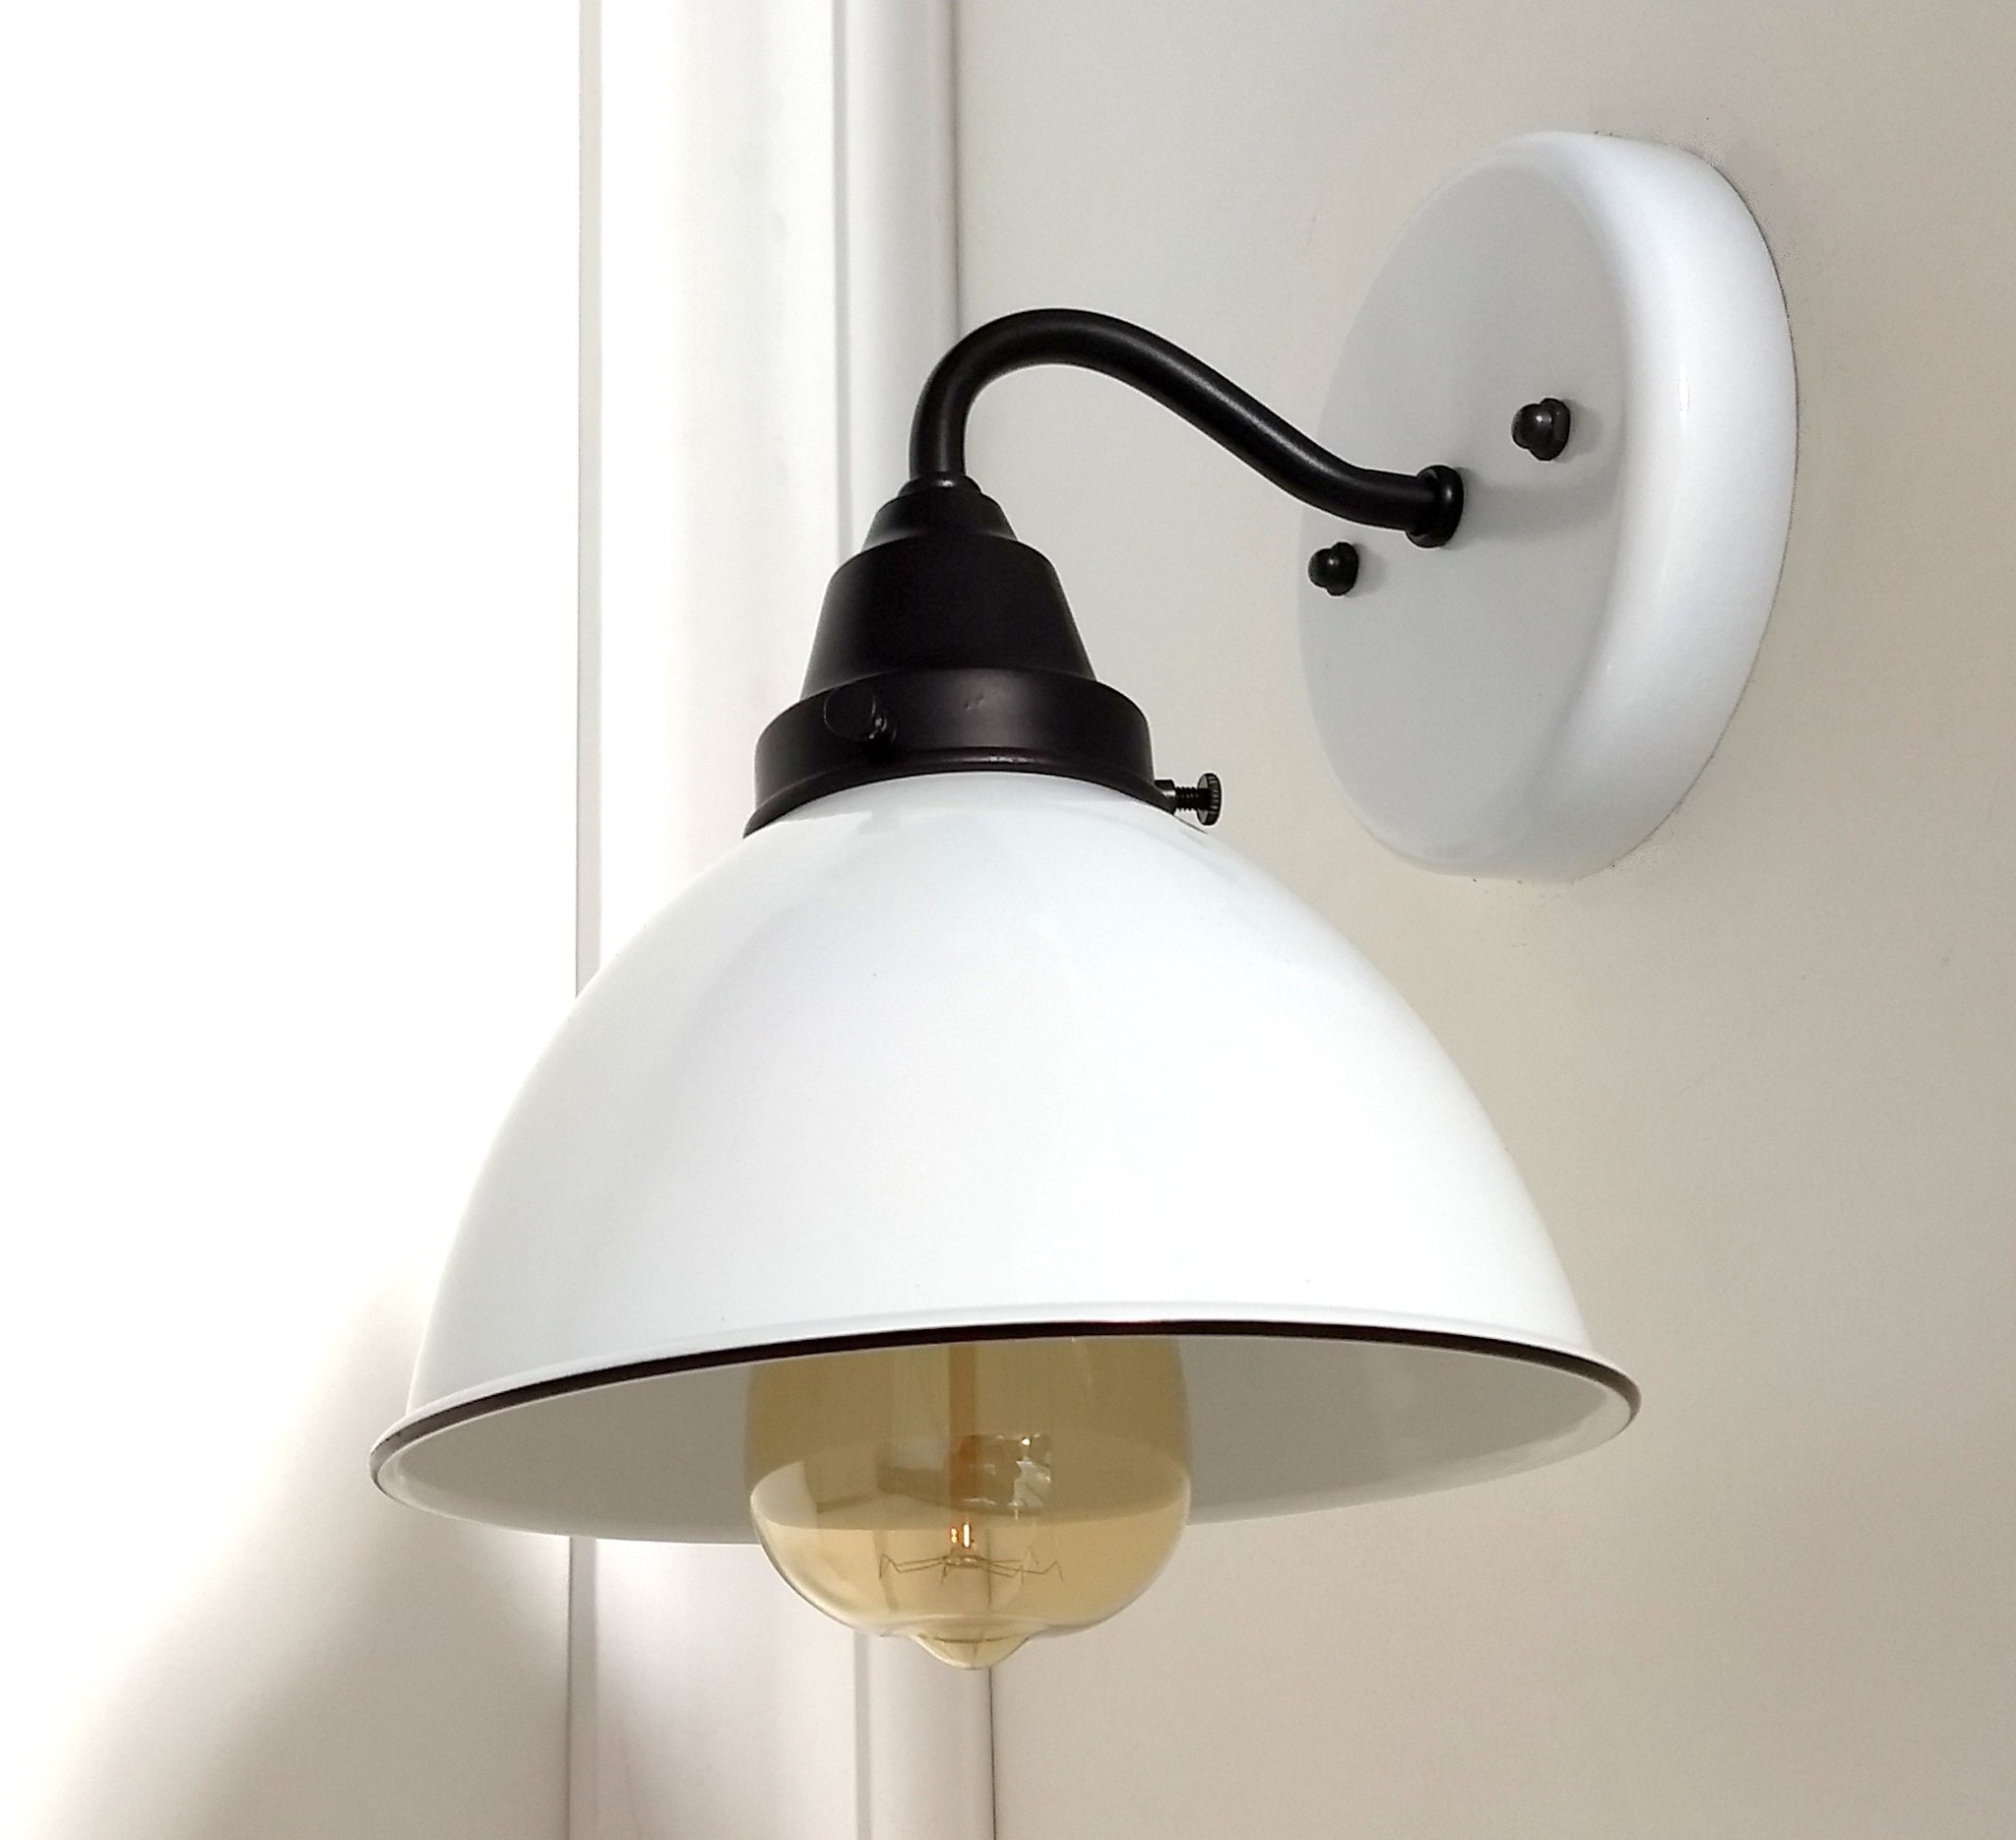 Bedroom Wall Light Fixtures Beautiful White Enamel Wall Sconce Farmhouse Lighting the Lamp Goods